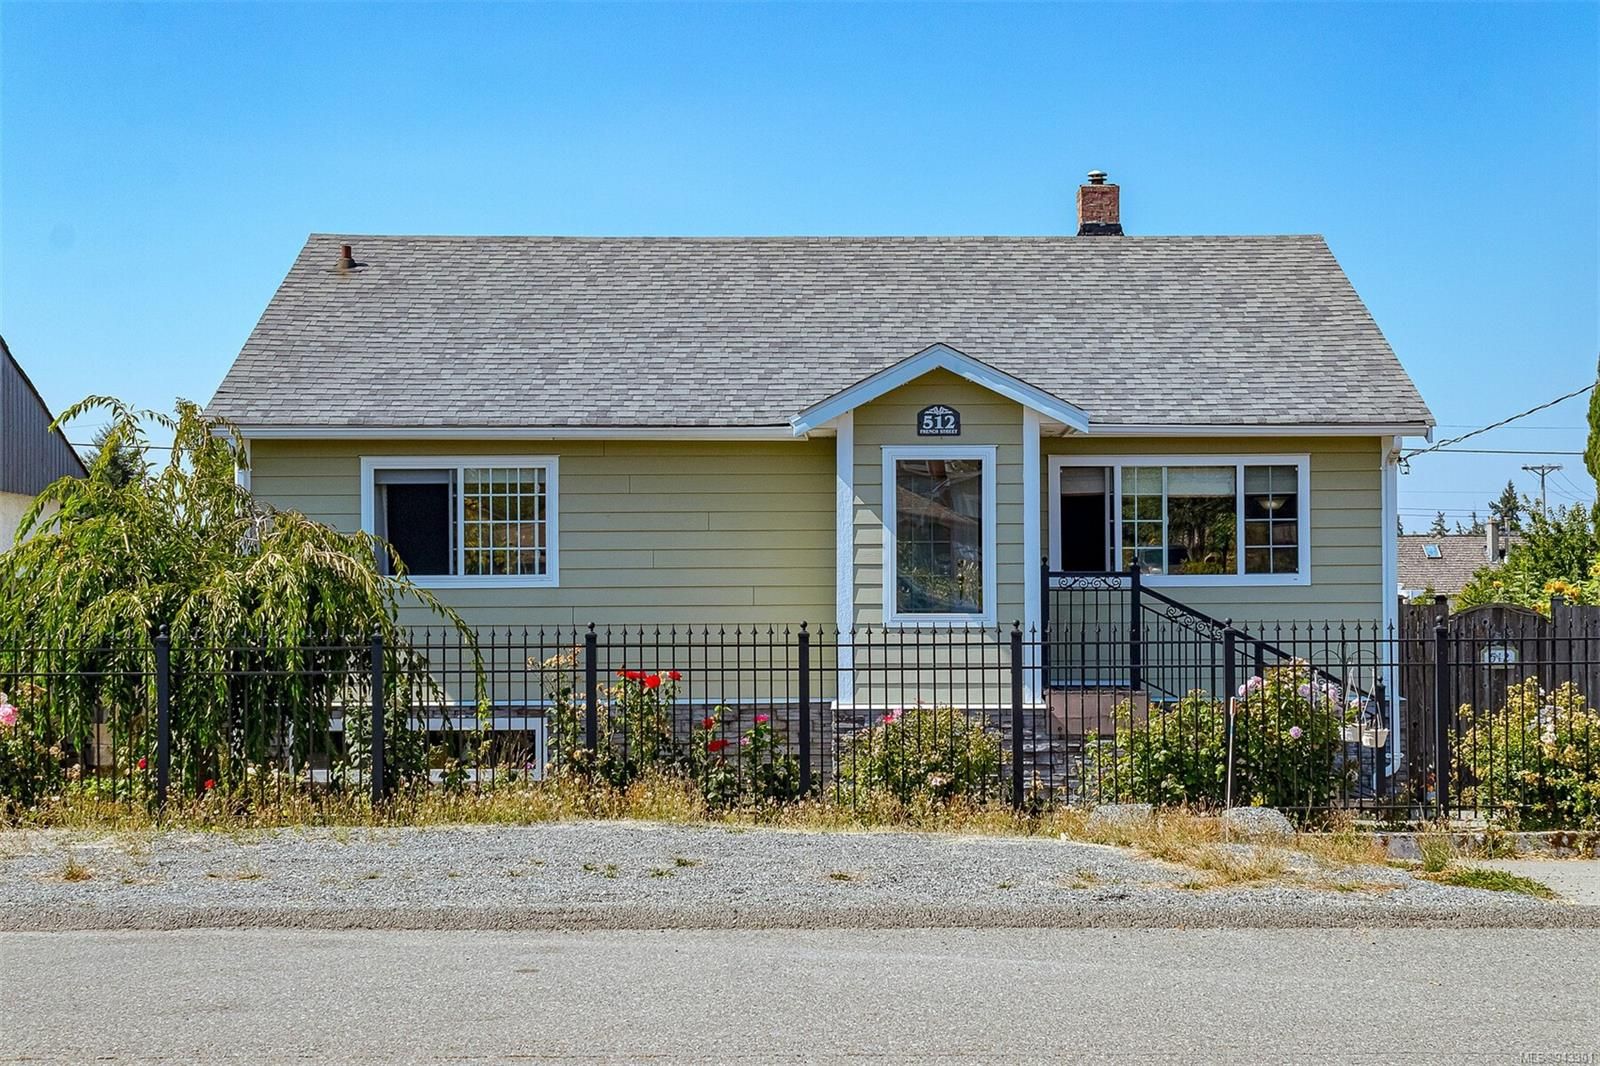 I have sold a property at 512 French St in Ladysmith
